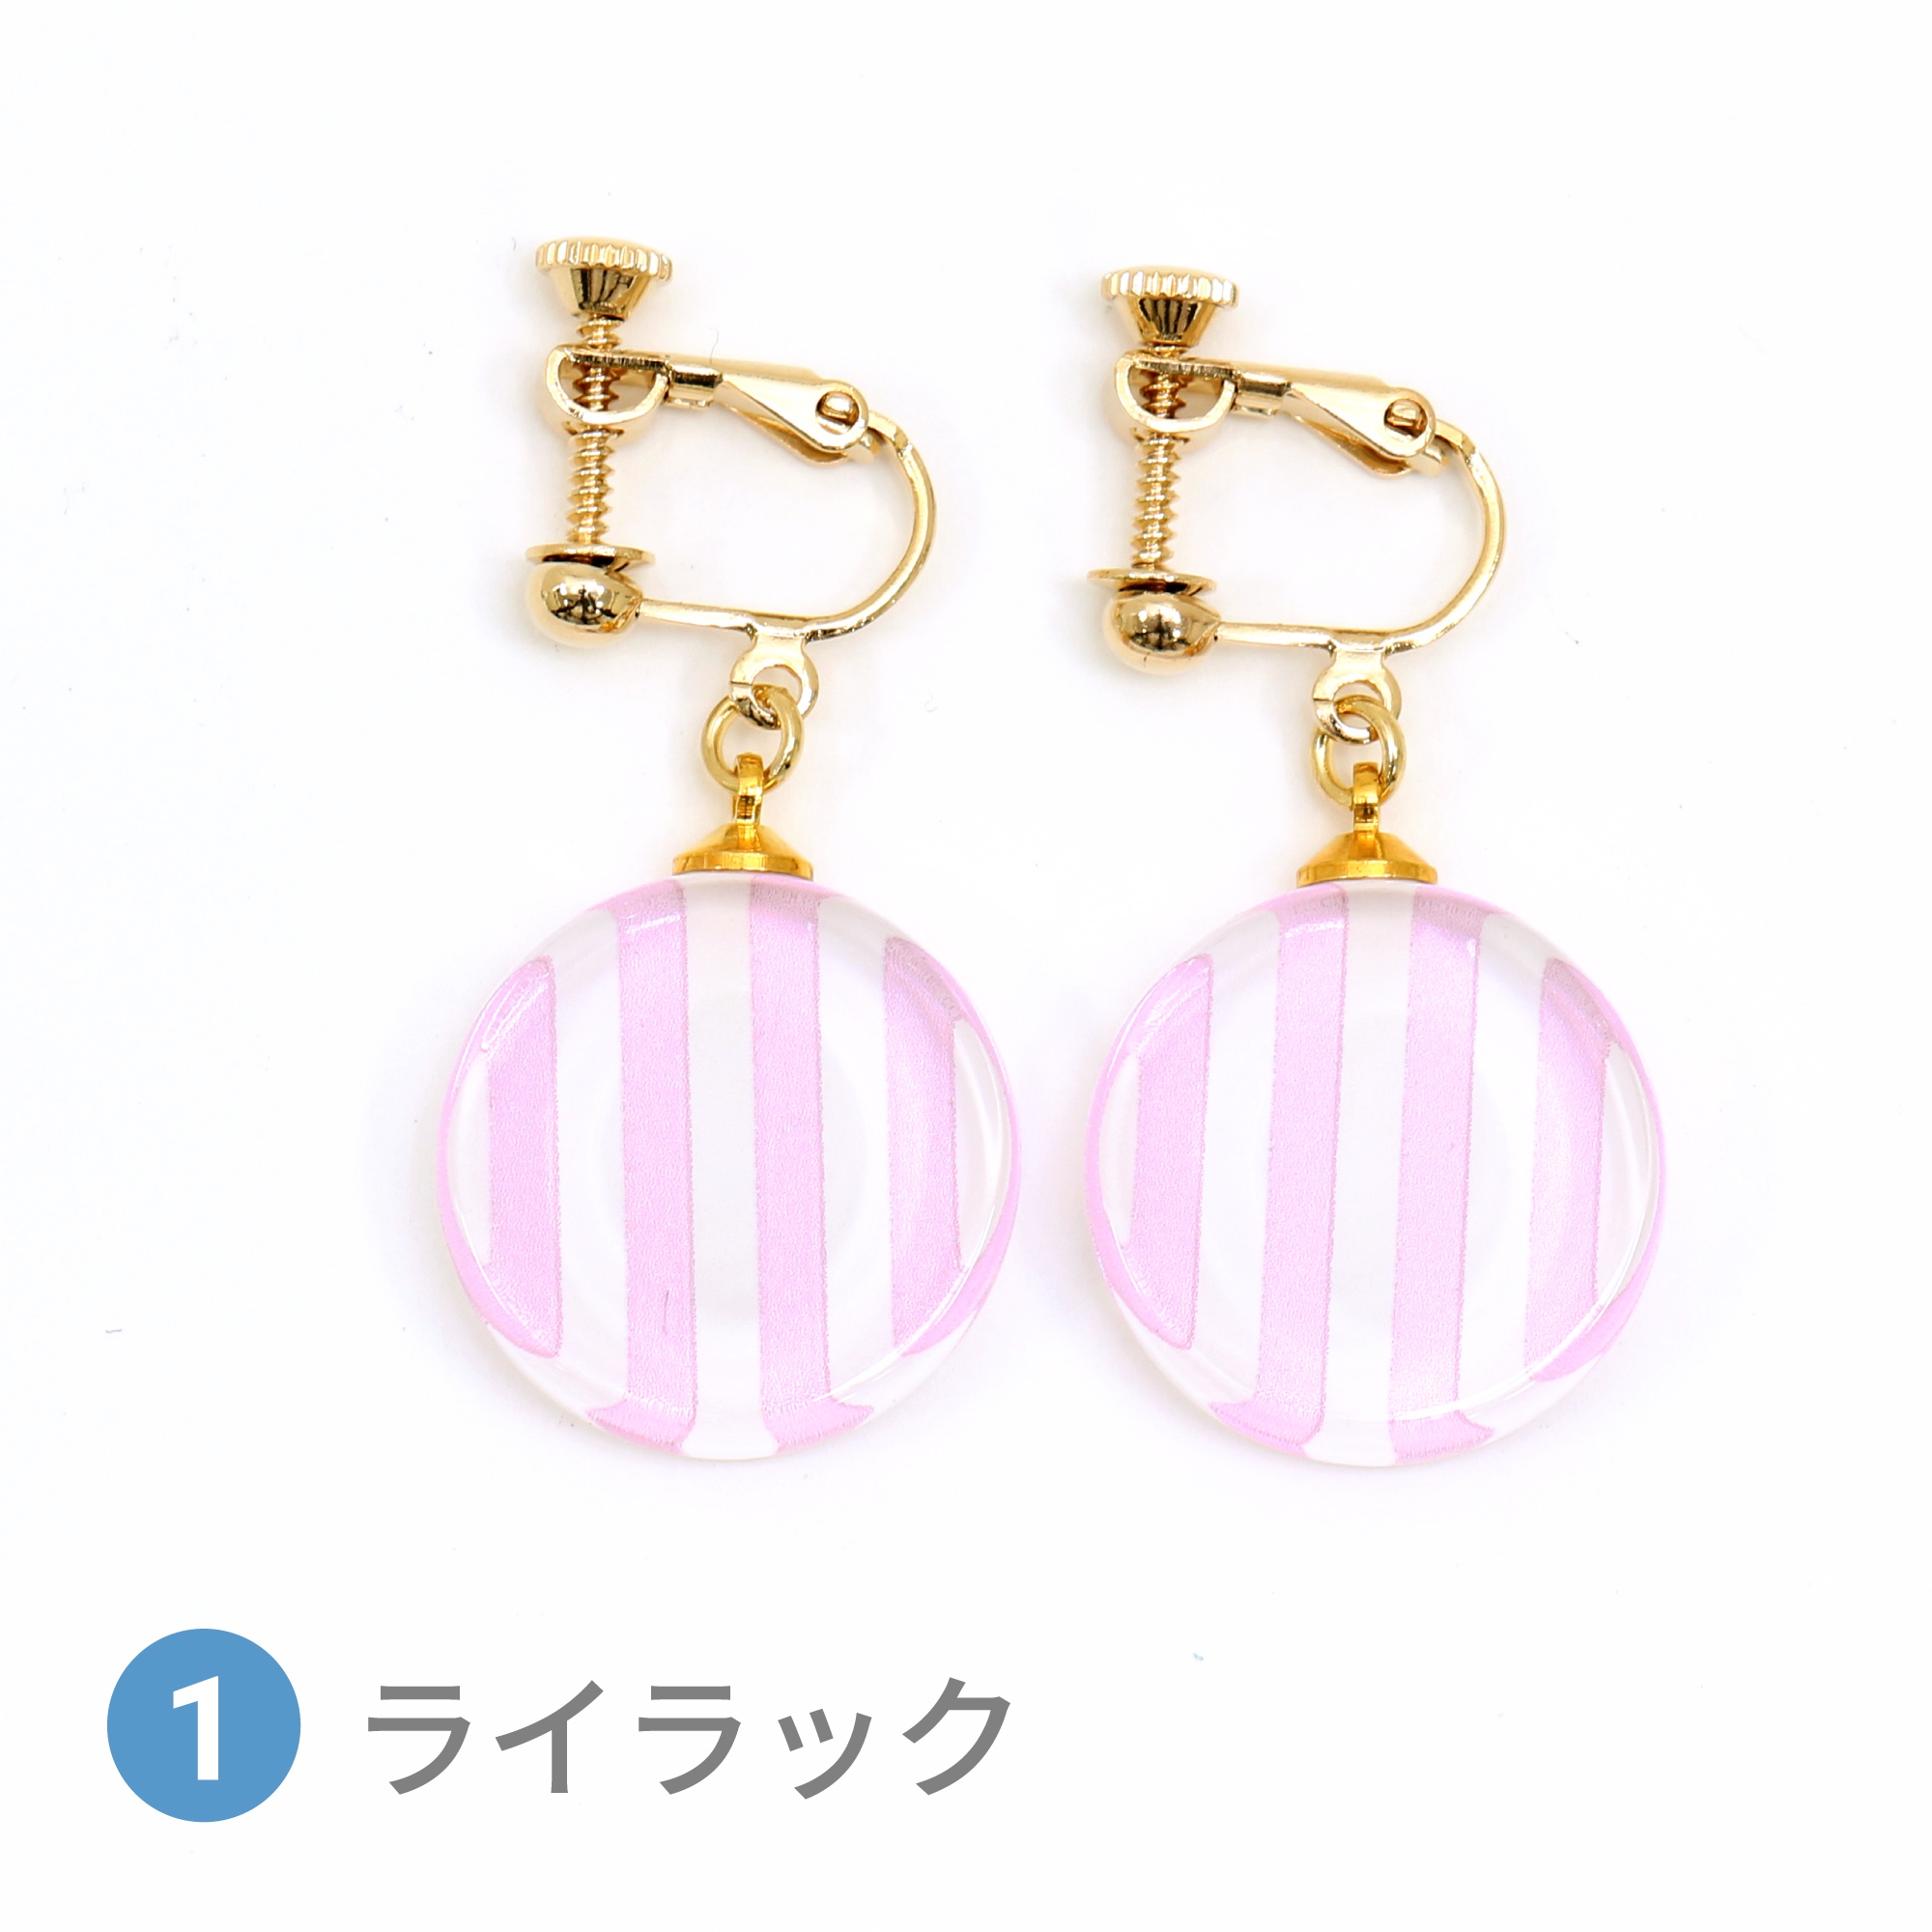 Glass accessories Earring STRIPE lilac round shape